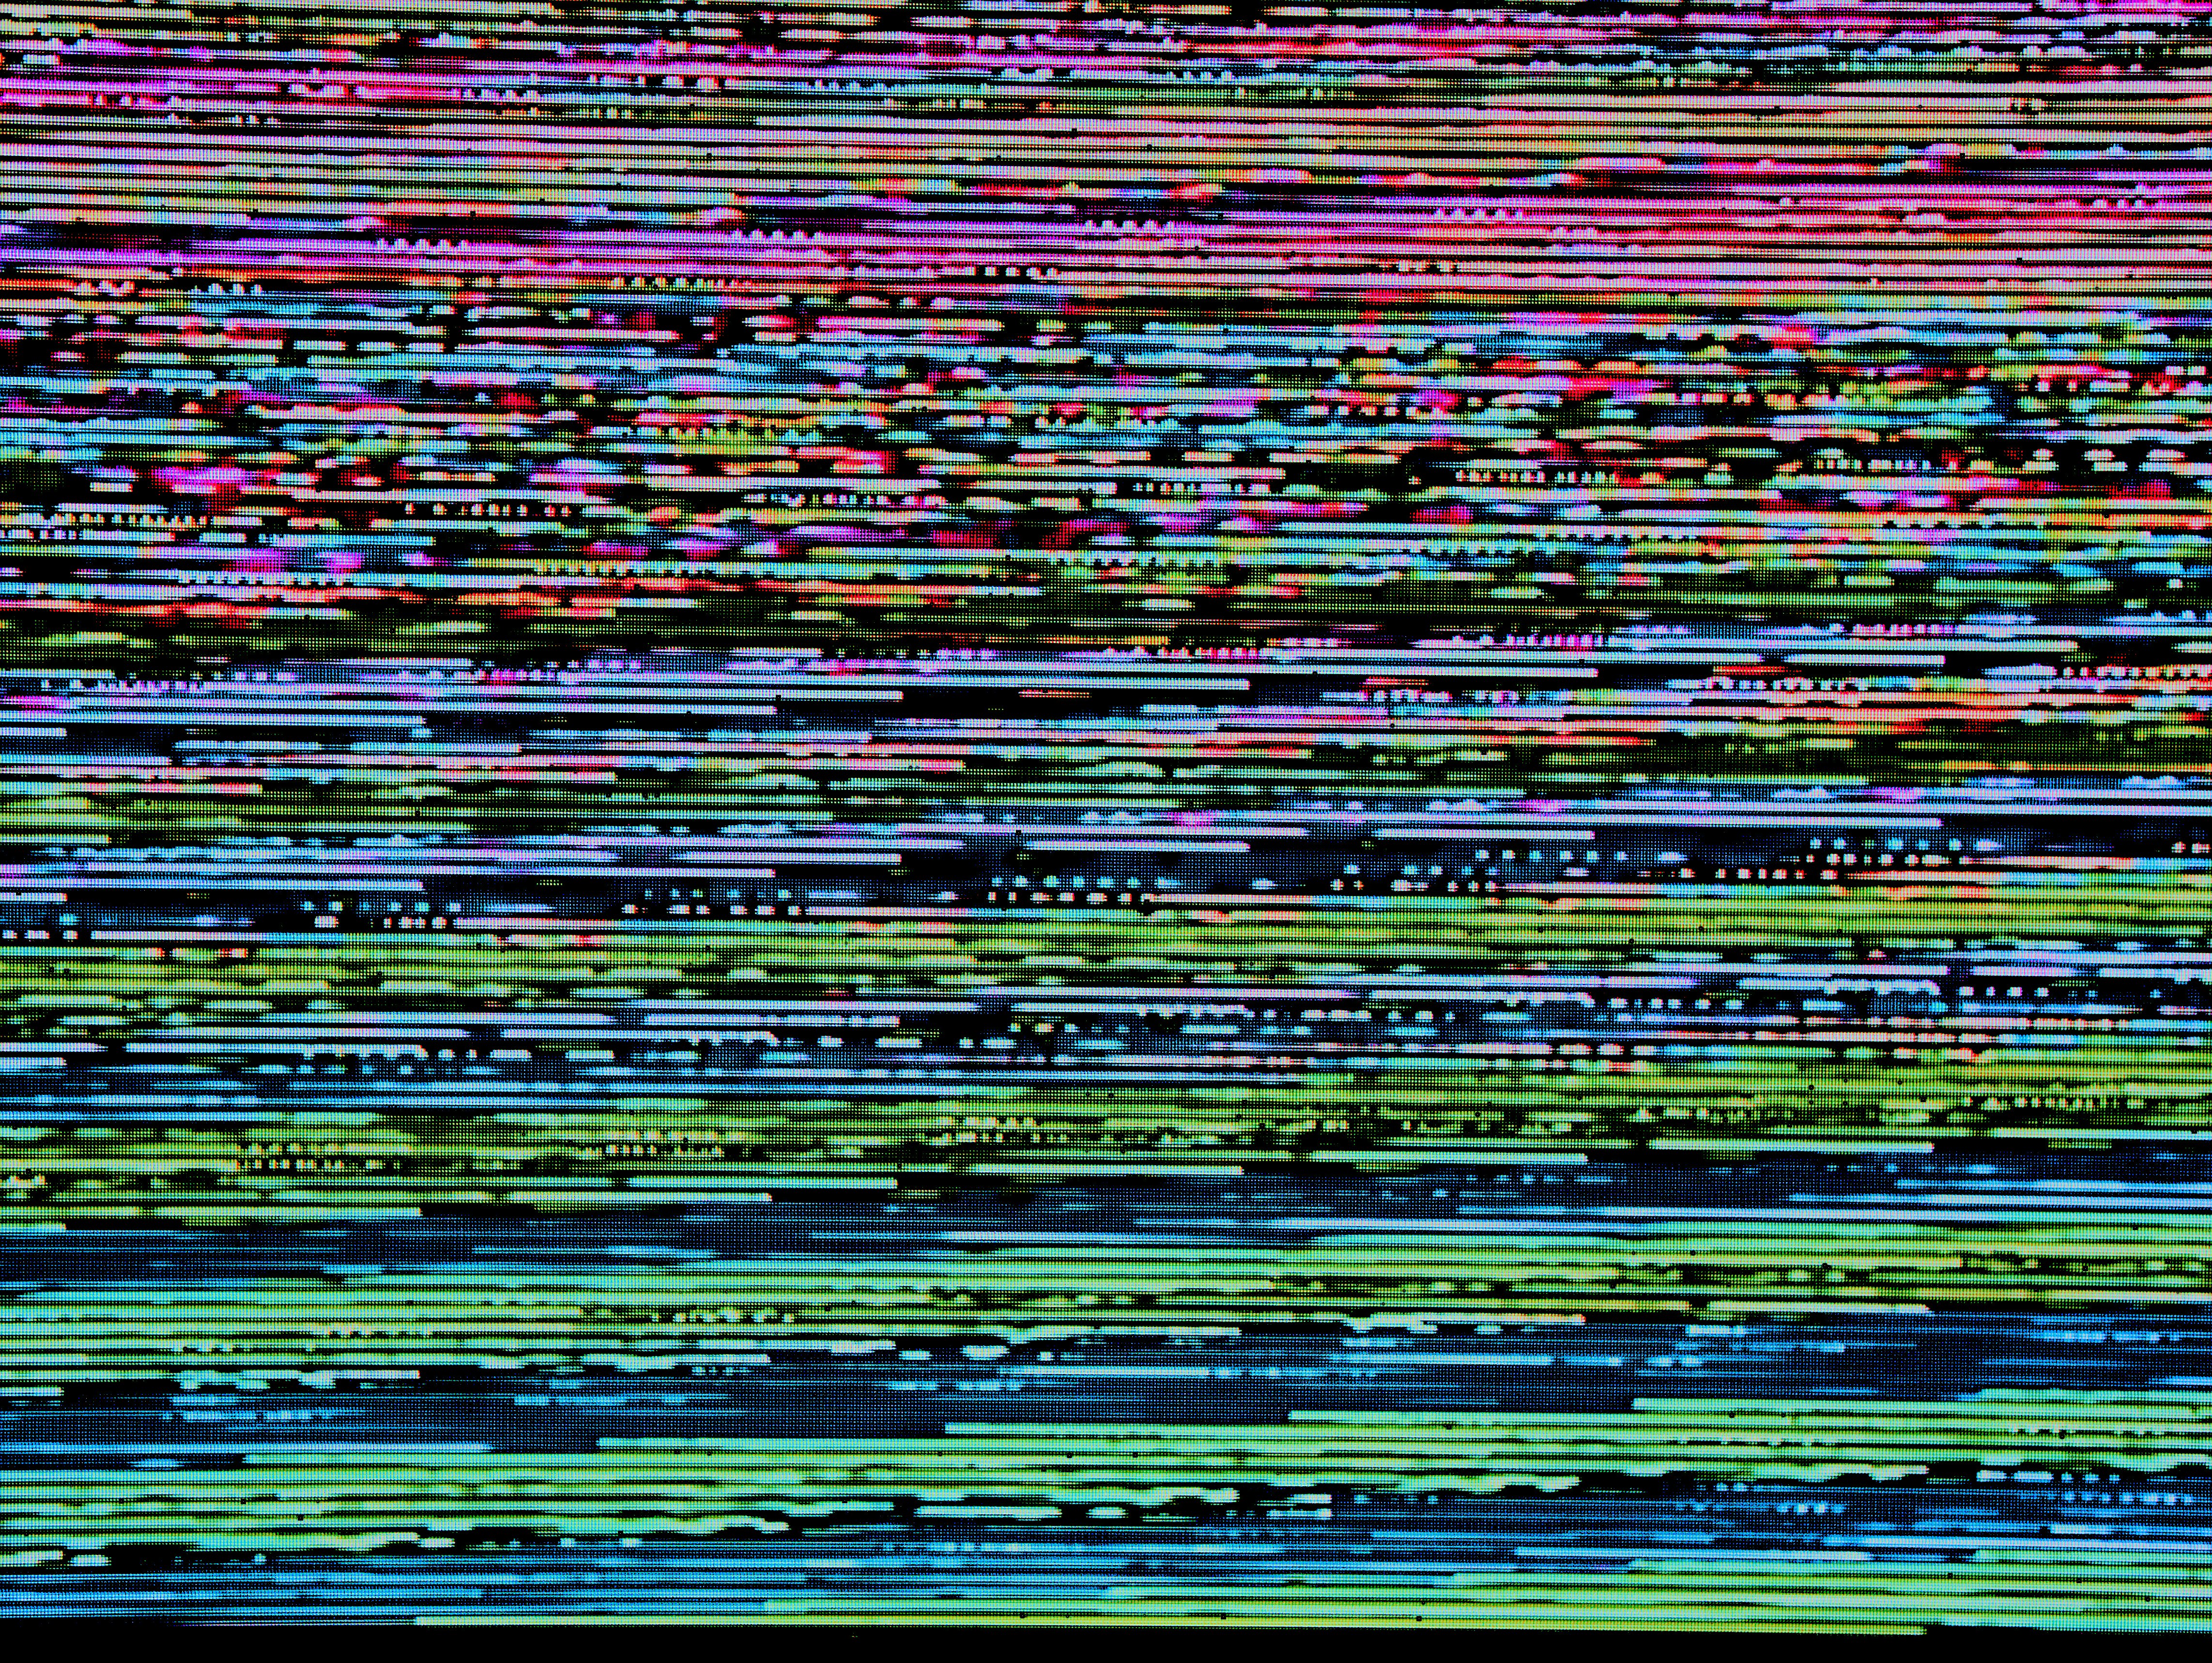 Glitch While Streaming - There were some really cool patterns and designs that appeared before I grabbed the camera.  Unfortunately I spent about 10 minutes complaining about the lost transmission of the game before I realized that I had a photo opportunity.   The screen went black after I took 3 photos...and never returned to the awesome patterns I originally saw.   Next time, I'll react quicker!